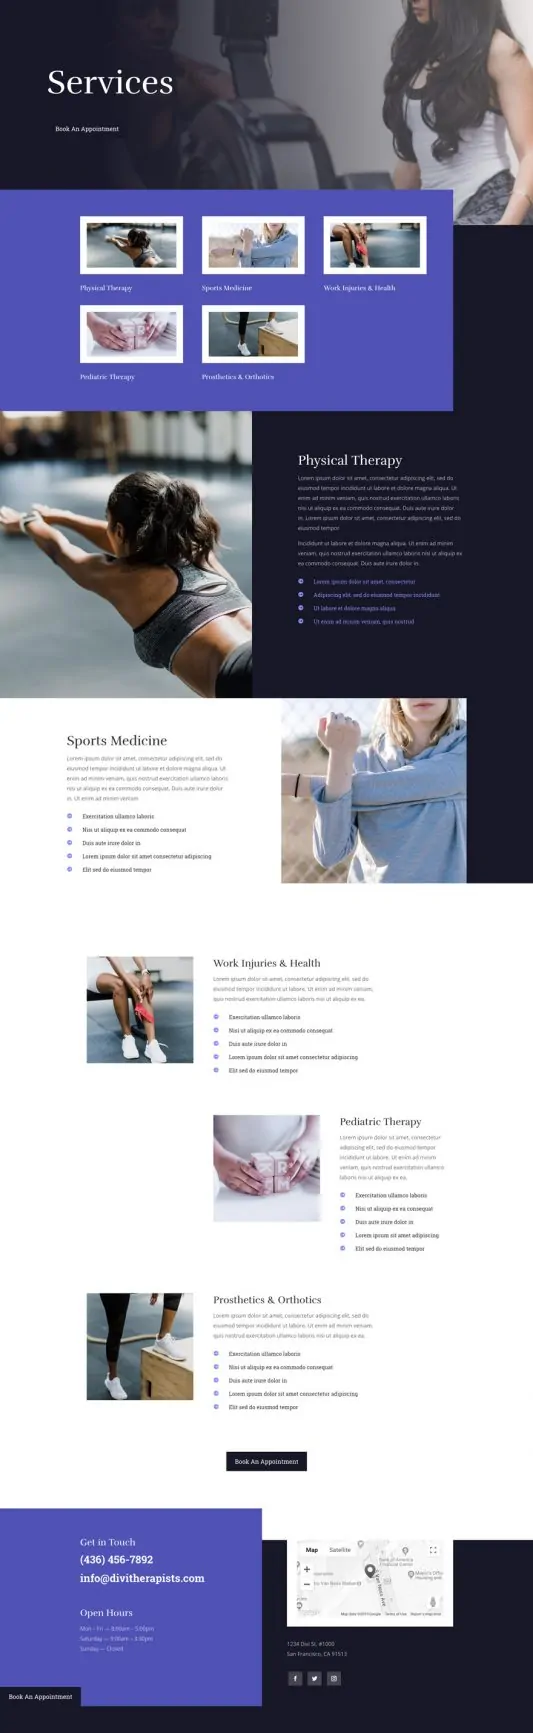 Physical Therapy Web Design 6